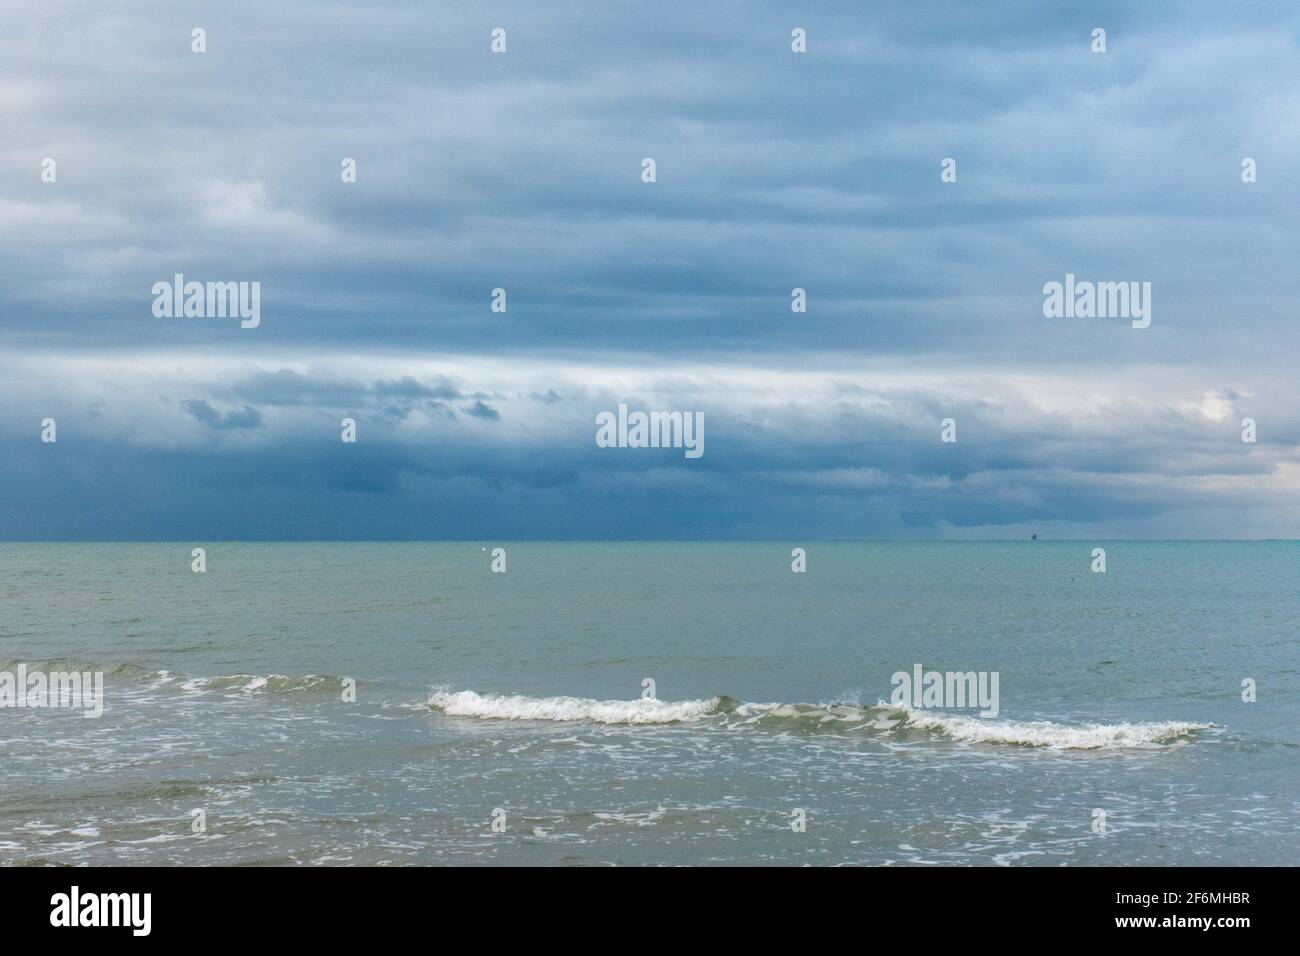 Sea water with waves and cloudy sky during a bad weather day Stock Photo